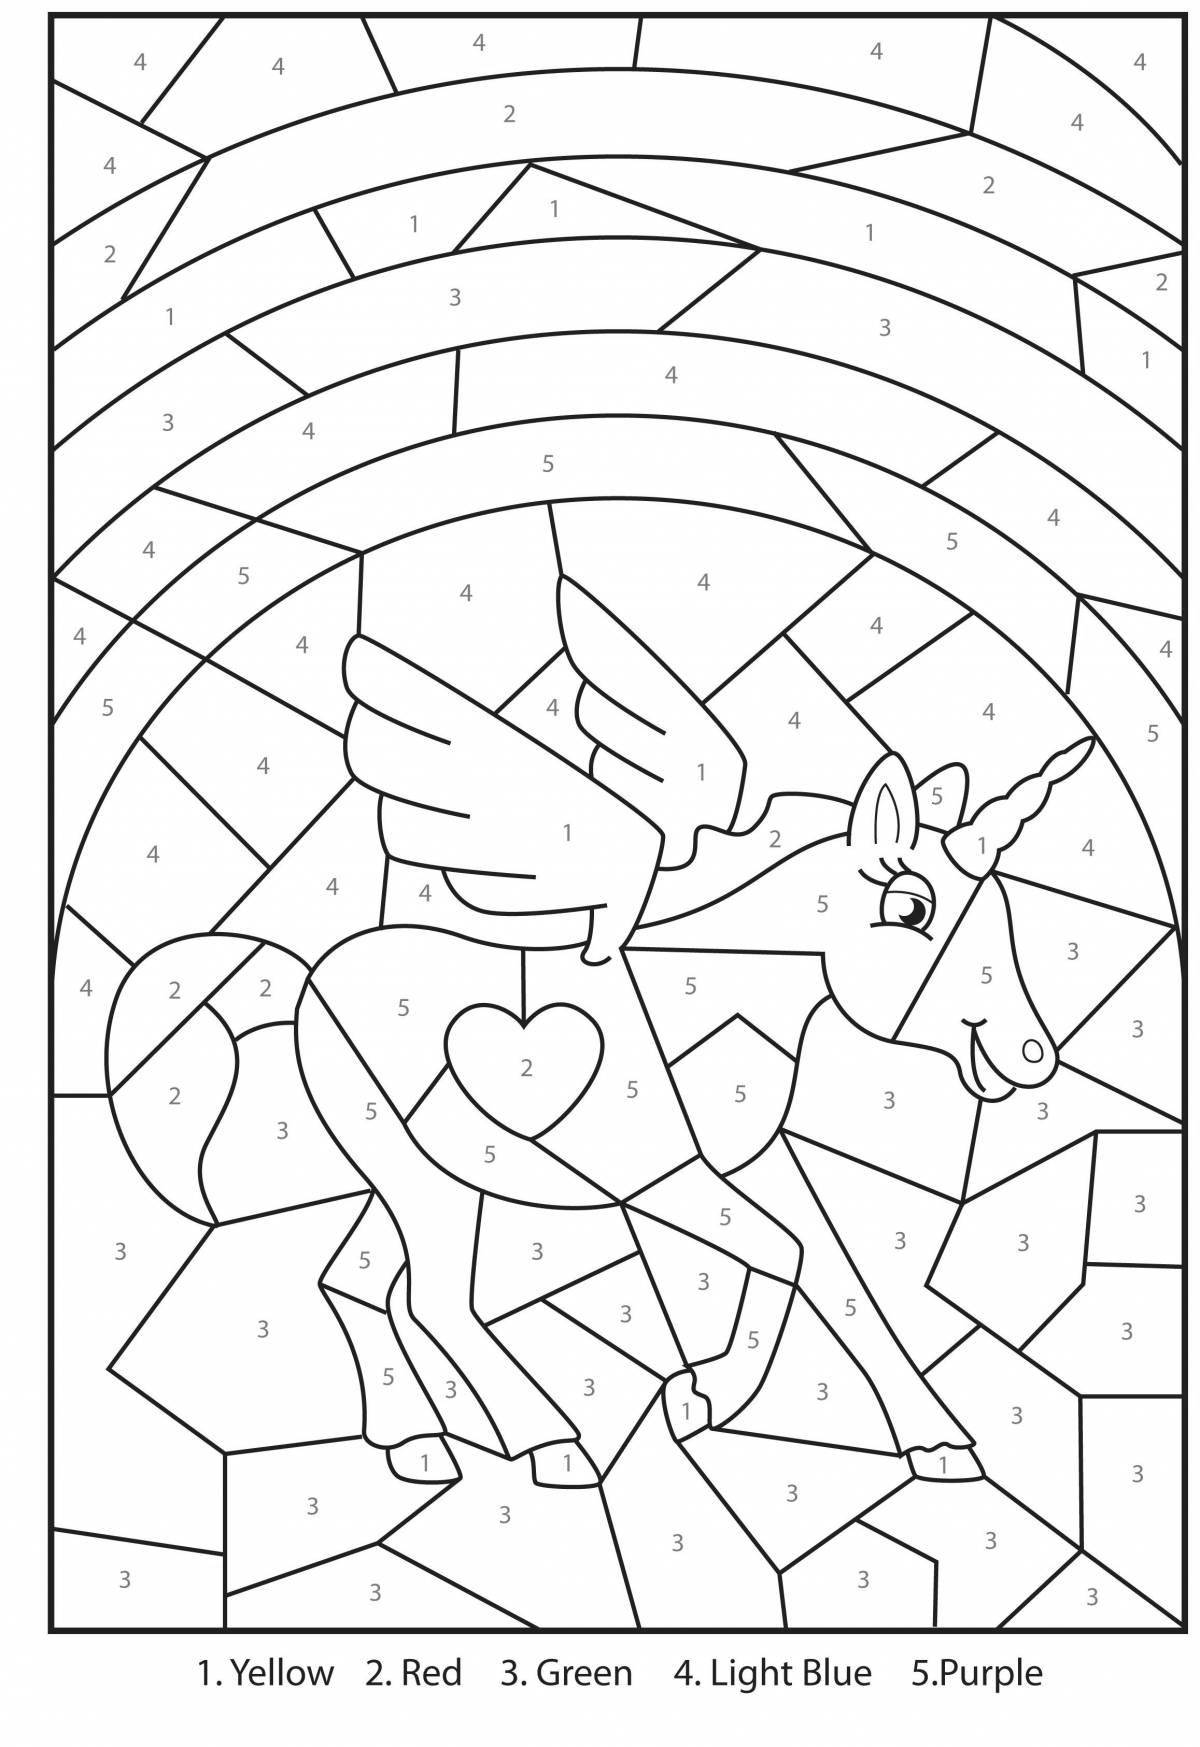 Creative mosaic coloring book for kids